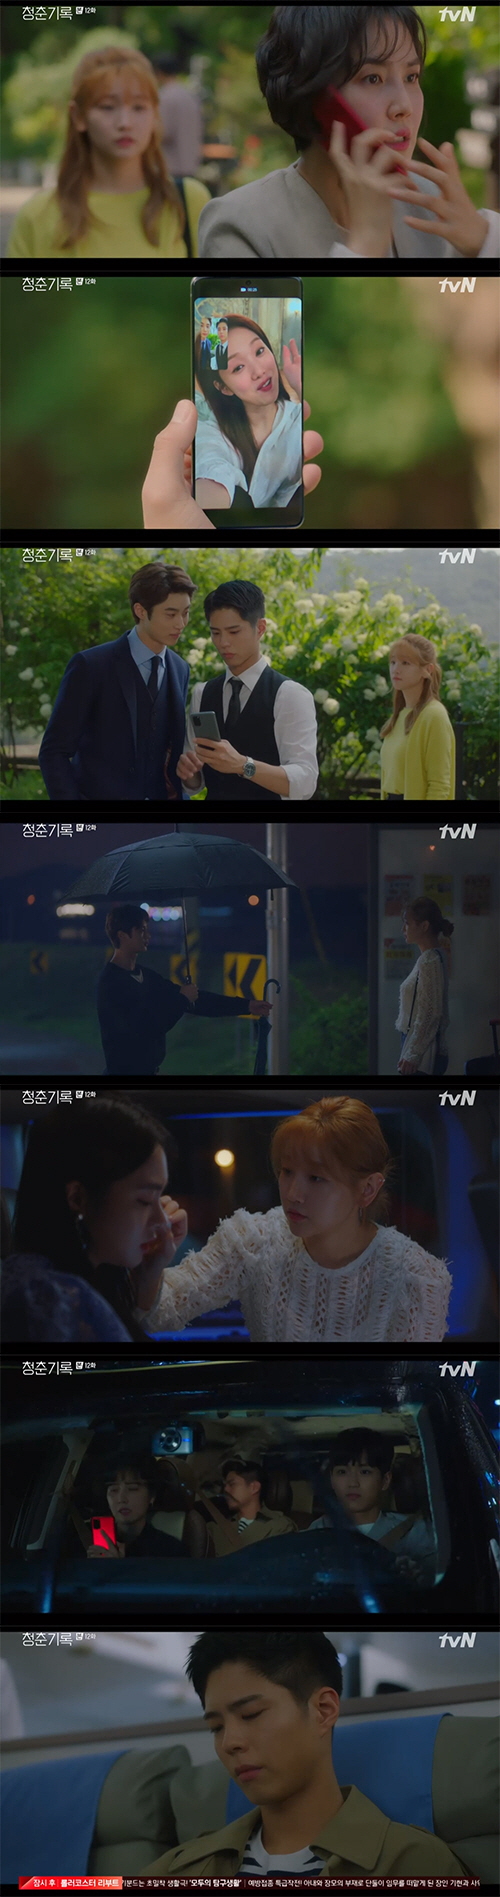 Park Bo-gum and Park So-dam are clouded by the love front.In the TVN Monday drama Record of Youth broadcast on the 13th, Park Bo-gum and Park So-dam relieved the rumors and received help, and a little cloudy clouds came to the front of affection.Sa Hye-joon said to Won Hae-hyo, I have help to receive and I do not have help. But Jias help is the latter.Won Hae-hyo was angry and said, If you were before, you would not do it.Won Hae-hyo said, Youre so busy these days and Hannah Jeter and Kim Jin-woo are a couple.Sa Hye-joon asked, When did you know you were dating Jinwoo and Hannah Jeter? Won Hae-hyo said, Did you know?When Jung Jia met with Won Hae Hyo, I have to be good with Hye Jun.I do not think you are good with Jung Ha. Won Hae Hyo said firmly, Even if you meet Hye Jun and you, you are not a person who eats anything. Han Ae-sook (Ha Hee-ra) was suffering from searching for bad articles about her son. Every time I see it, I feel feverish.I do not think the people of the station are stupid and give it to me. He showed anger at Lee Kyoung-mi (Park Sung-yeon).Lee Kyoung-mi advised Han Ae-sook, The representative is too bad; Hye-joon should move to a big company, and the company name is not Champon or Chinese house.Kim Yi-young (Shin Ae-ra) tells her daughter Hannah Jeter (Joe Yu-jung) about dating Kim Jin-woo (Kwon Soo-hyun), saying, When I get married, I have to live only one person.And just be good at contraception - just come home playing, he said.One Hannah Jeter was angry, Why do you claim ownership? And Kim Yi-young took off the car key, saying, Come to know how hard it is to meet without a future.I thought I could not beat my mother, said Hannah Jeter, who met Kim Jin-woo, and Kim Jin-woo said, Love is fantasy. Marriage is reality.I dont intend to move on from fantasy, because I love you, she said.Jung Jia went to Champon Enter and met Sa Hye-joon. Sa Hye-joon said coolly, I do not want you to appear in my life. Jung Jia said, I knew I could not stay as a man.Lets get a little comfortable now, he said.Jung Jia said, I was so happy when you went well. Im the one whos ruining you. I dont want anyone else to ruin you.I do not owe you anymore, he said, and said why he helped.Park Do-ha (Kim Gun-woo) went to Lee Tae-soos office and began to suspect, Its strange to see, there are too many Hae-hyo followers.Park Do-ha said, I feel uncomfortable with the self-esteem of the body from Haehyo.Won Hae Hyo went to the shop of Ahn Jung-ha and said, I received the contact information of the woman who talked about it at that time.But An Jeong-ha refused, Theres an airing this evening.Won Hae-hyo asked, Why do not you say that you are solid? And asked about the difficult times these days, and he showed his belief in his boyfriend, Sa Hye-joon, saying, Its hard but I will tell you when.Sa Hye-joon met Kim Jin-woo and drank and said, I fought Haehyo because of the Jia interview. Kim Jin-woo worried, But what if you see the interview?I have an interview with Jia sister alone, said Won Hae-hyo, who returned to a stable house. I do not feel like talking to you, I have to see Love Live now.Im sorry, but I have to meet you to talk about it, said Sa Hye-joon, who called me to Confession under the title of Stable Love Live!I reconnected to the stable Love Live!, which hung up, and said, Yes, you are actually my boyfriend.In the end, Kim Jin-woo and Sa Hye-joon, who drank alcohol, came to the fans and asked, Can you take a picture together?But fans posted on SNS, Sa Hye-joon is drinking with his boyfriend.Kim Jin-woo, who met Won Hae-hyo, asked, How were you? Won Hae-hyo said, How did you think about dating Hannah Jeter? But you did not think to talk to me.Lets get one shot, he said, but he was angry.Sa Hye-joon said, Mom did not forget that I was a child when I was a child.Lingnan (Park Soo-young), who saw this, was surprised that he made all this a year, and Han Ae-sook cried when he saw his sons hard-earned money and said, I do not want to receive this money.I did not date Charlie Chung, right?I have to make reasonable doubts, and Lingnan eventually called Lee Min-jae (Shin Dong-mi) and asked, I called because I was curious, but when did I have a manager contract with Hye Jun?Lee Min-jae said, The time has passed to write the contract, but if you do not want each other in the contract, you will be terminated. But what did Hye-joon talk about the contract?After breaking up with Kim Jin-woo, Sa Hye-joon went to the house of Ahn Jeong-ha.I fell in love with my girlfriend and told us that it was a small thing, and Haehyo introduced me to Top Star Actor. I want to be the persons exclusive. Sa Hye-joon, who listened to this story, said, I will be pushed by Hae-hyo. Sa Hye-joon asked, Have you seen the Jia interview? Stable I felt bad.But why do not you discuss this with me when it happens? Why do I make me think about various things alone? You make your anger calm, I want to show you only good things, said Sa Hye-joon, and said, I am a child, thats what my parents are talking about.Sa Hye-joon said, If I show pain to my loved ones, my self-esteem falls. He said, The people you love are rather frustrated if you hide.In addition, Lingnan, the arm of Sa Hye-joon, asked Lee Min-jae, who came to his house early in the morning, Did you sue Sa Hye-joon? Lee Min-jae said, The first evil was filed.Sa Hye-joon told Lingnan, I know my dad is worried about my work, but Min-jae is my person. Please do not hurt me.For the entertainer who connected with Won Hae Hyo, he was waiting for the bus alone while the rain was going to the local filming location, and he called Sa Hye Jun, but Sahejun, who boarded the plane for an overseas fan meeting, did not receive the phone call.At this time, Won Hae Hyo appeared in front of the stable and handed the umbrella.There was no stable word when I went home in the car of Won Hae Hyo, and I was told to bring Won Hae Hyo to the house.